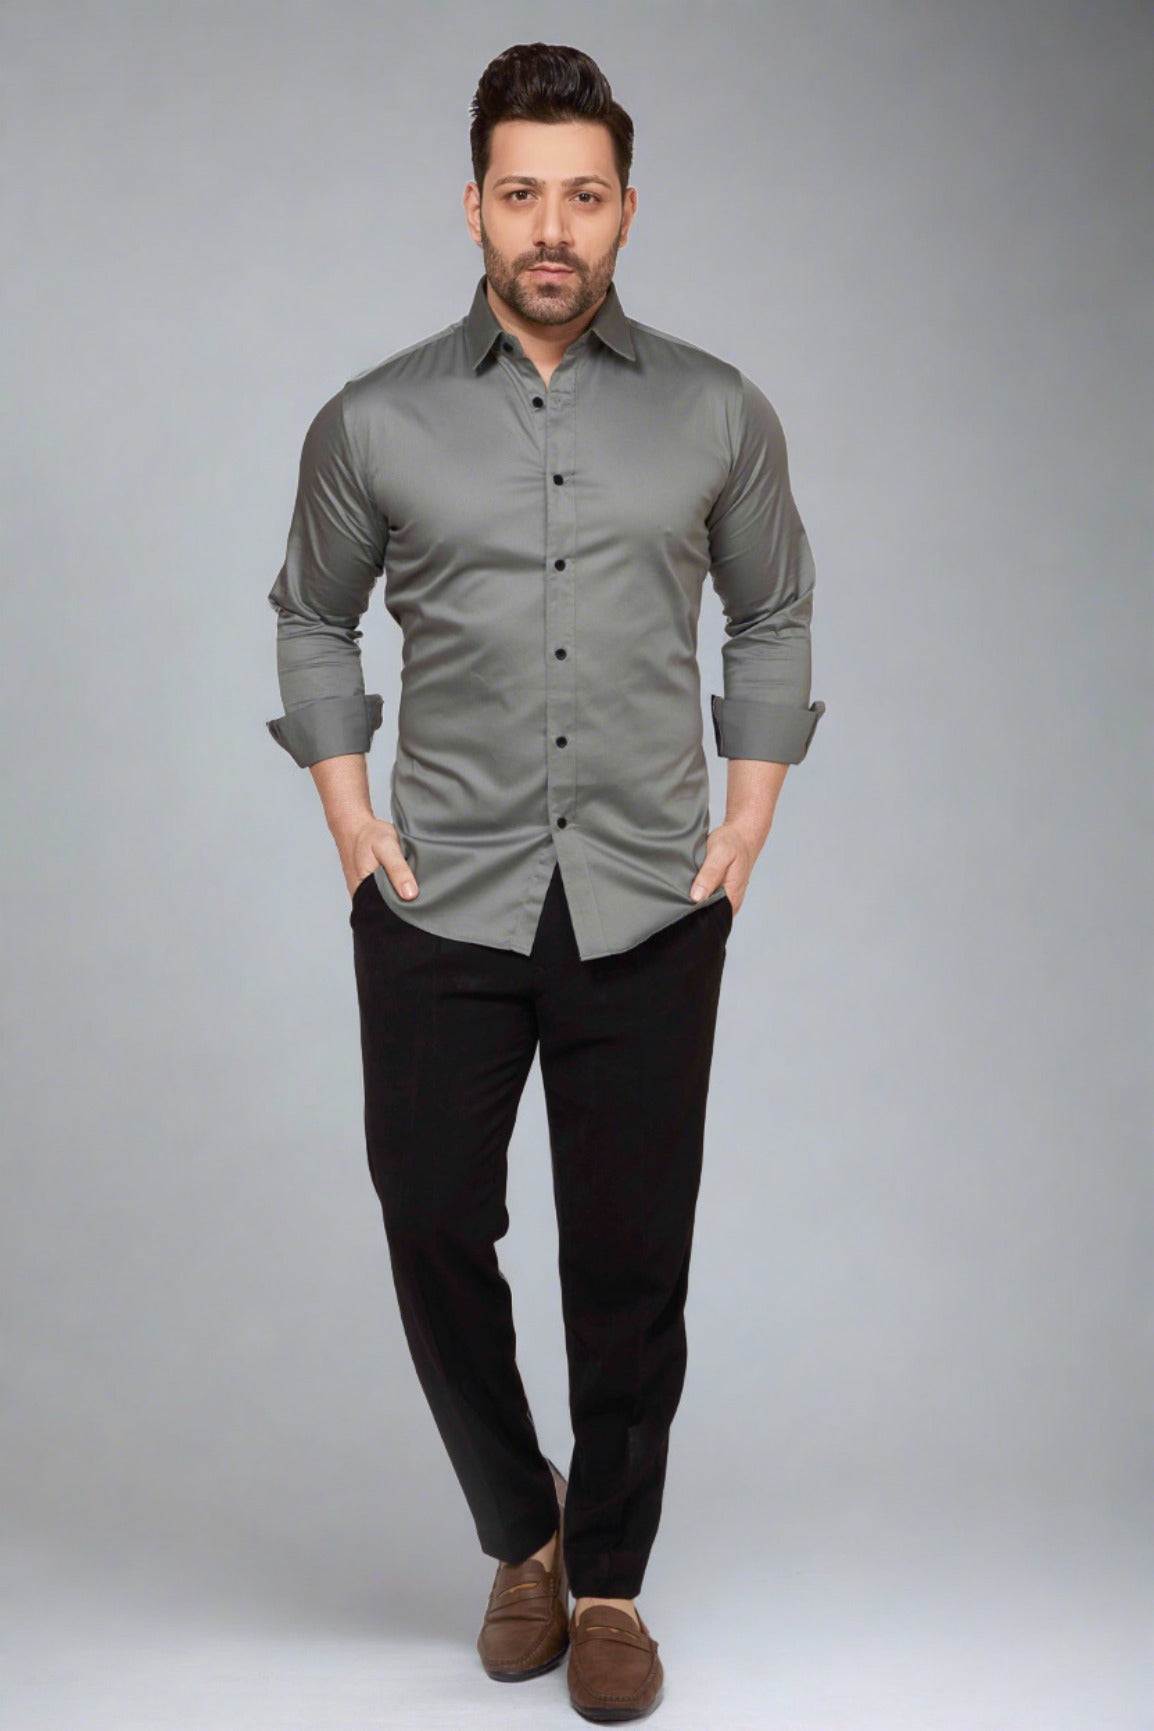 Which colour shirt should I wear with black pants? - Quora